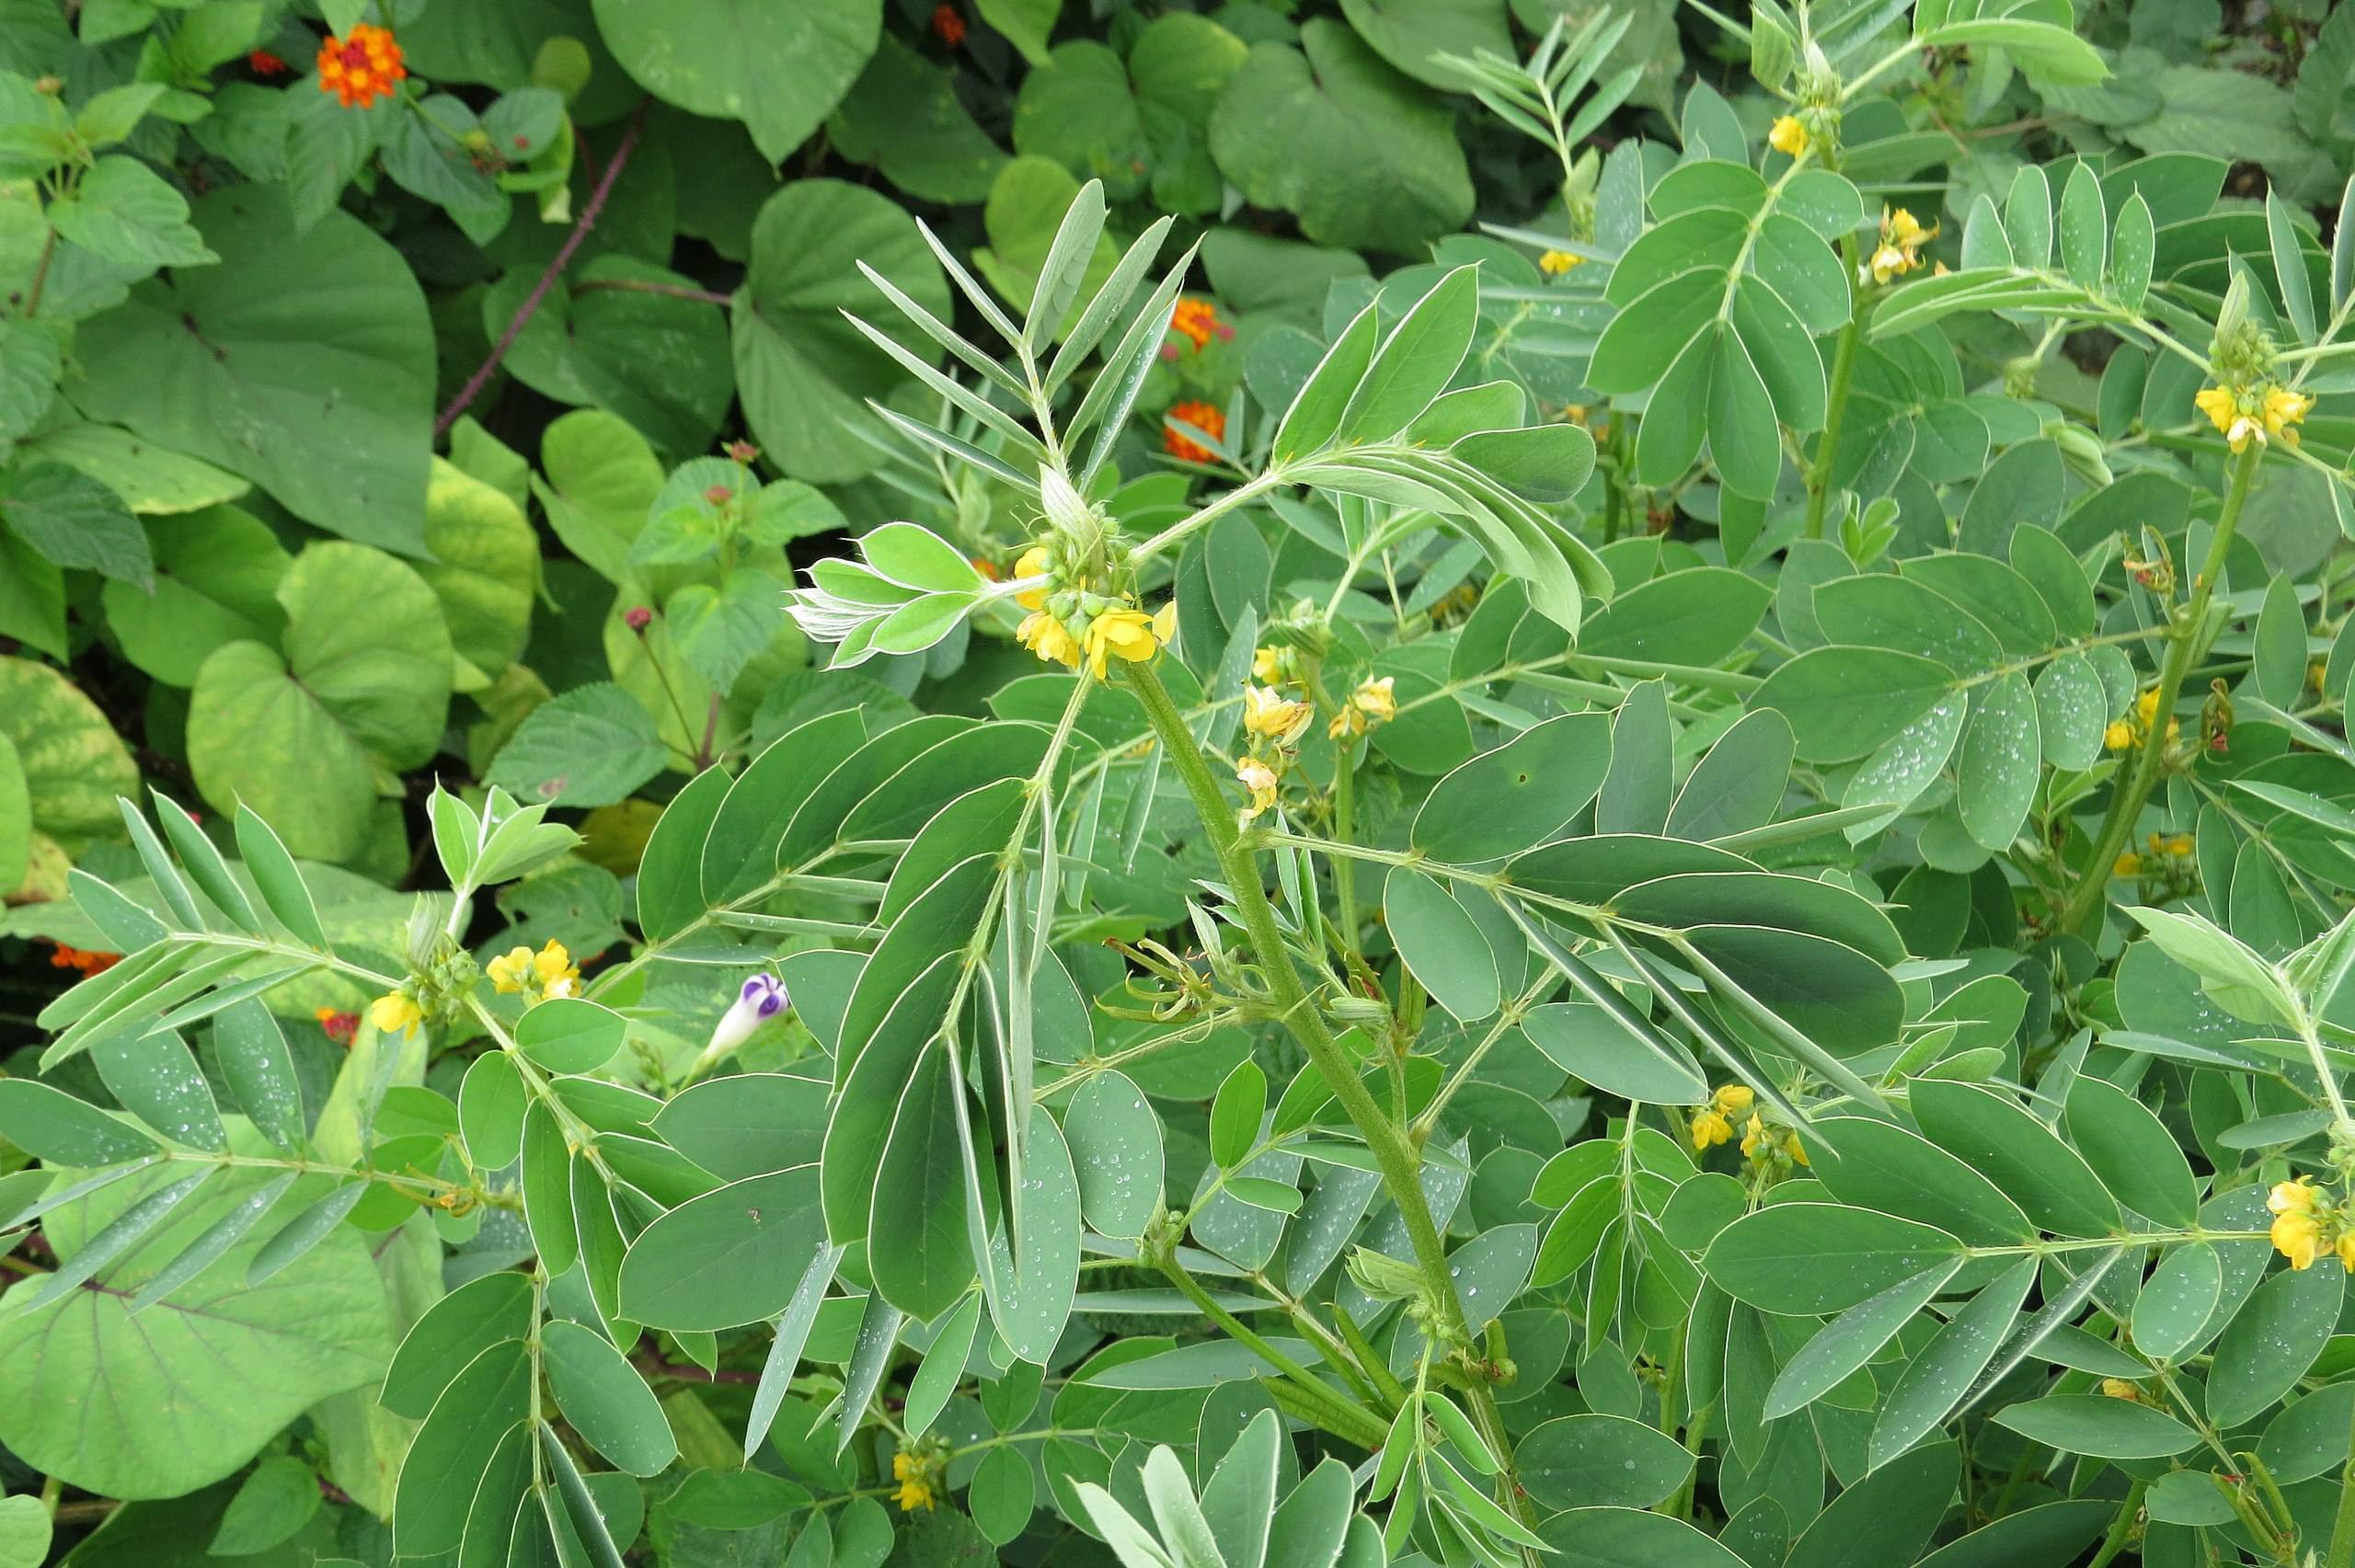 lime-green leaves with yellow midribs, flowers and green stems